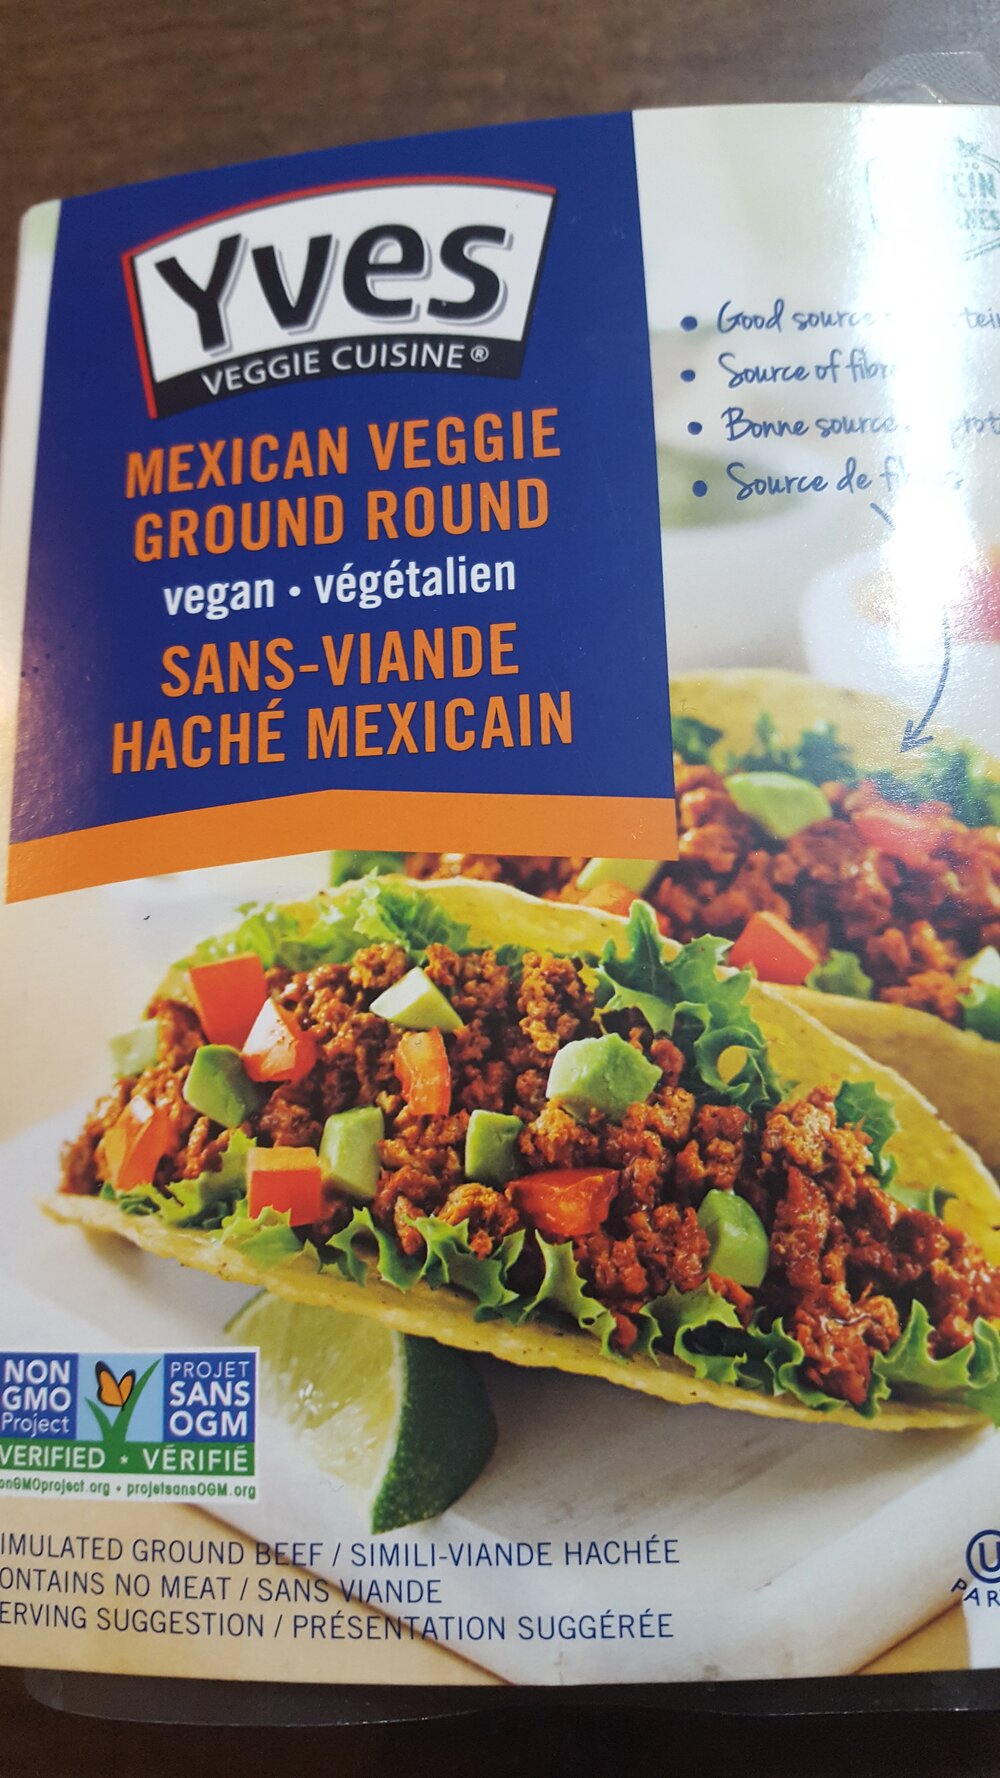 Yves Mexican ground soy